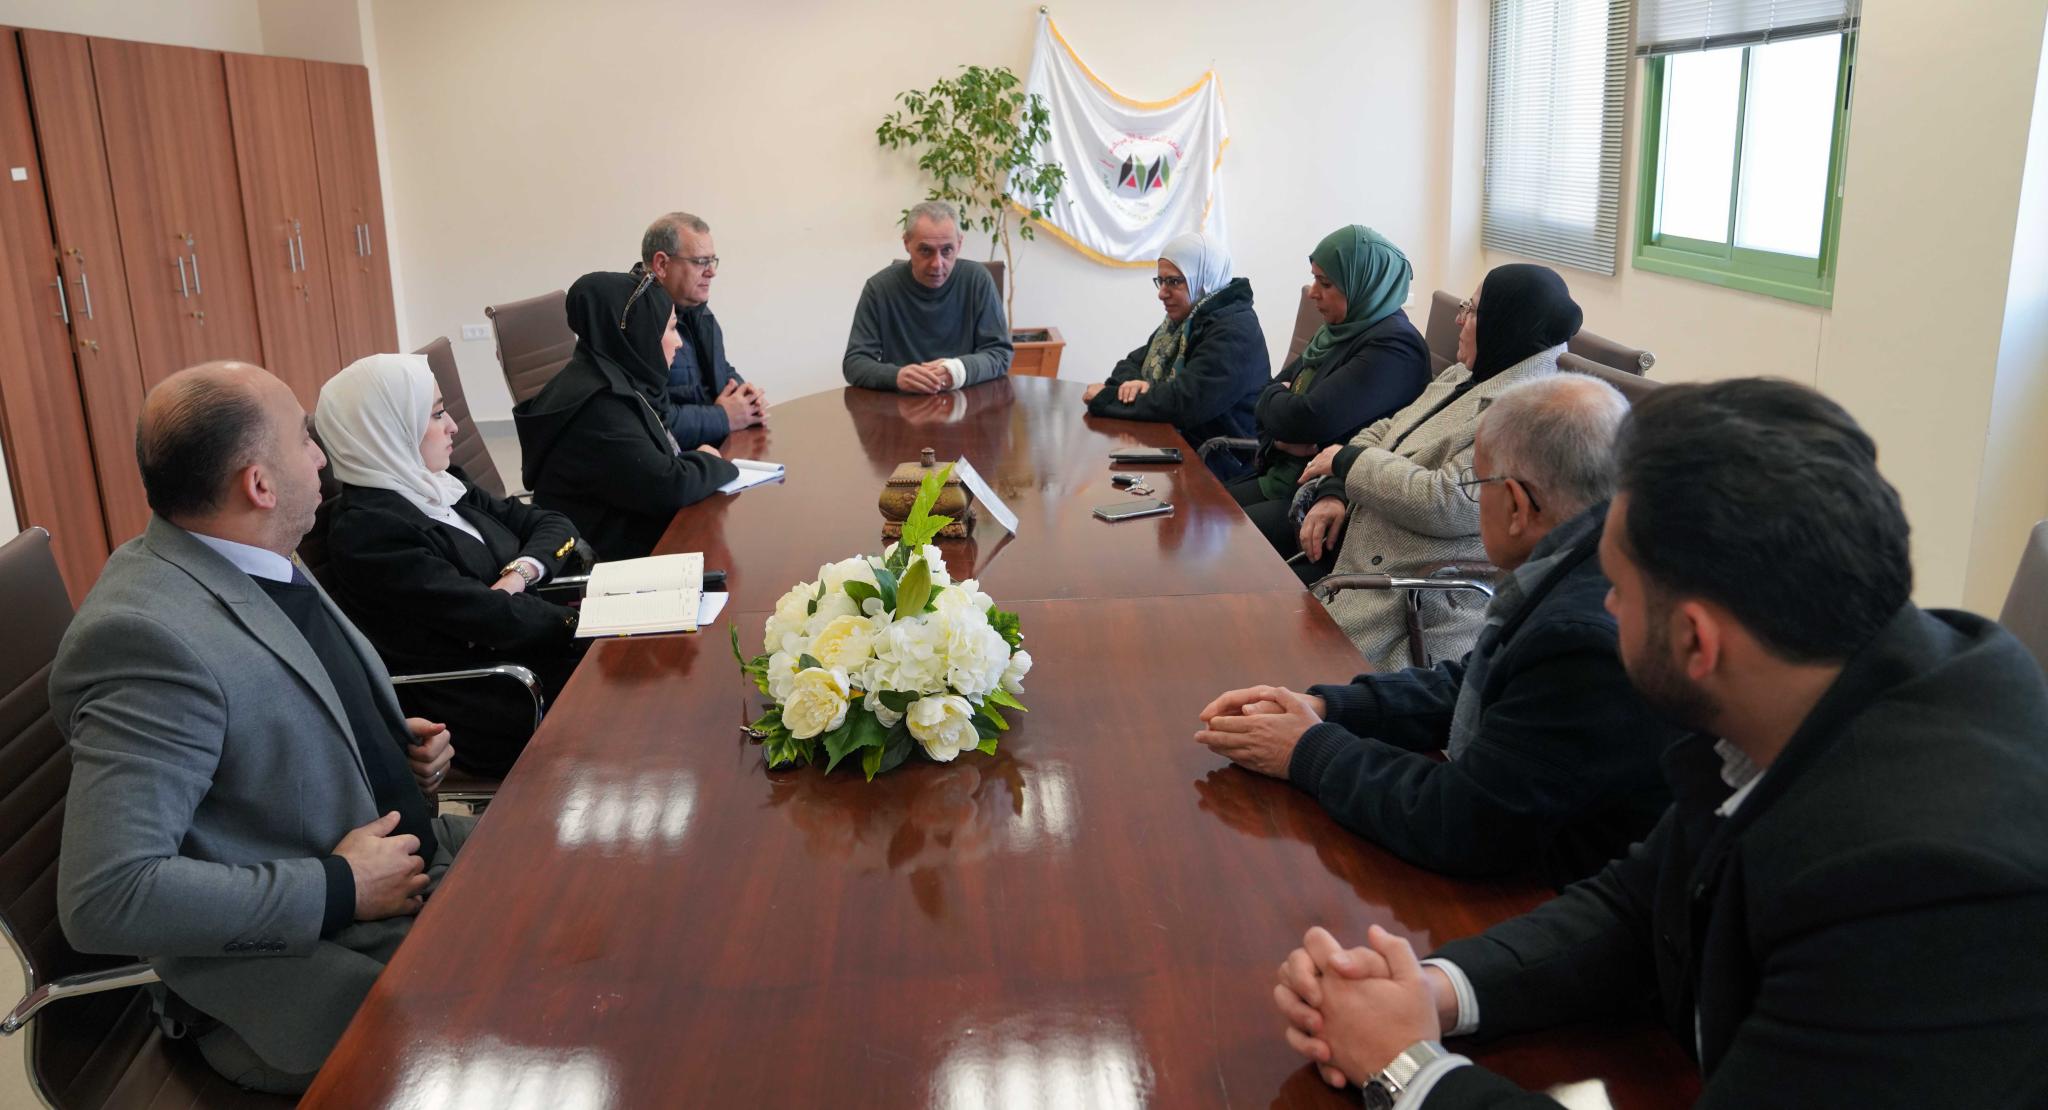 A Delegation from Jenin Governorate Visits the Arab American University